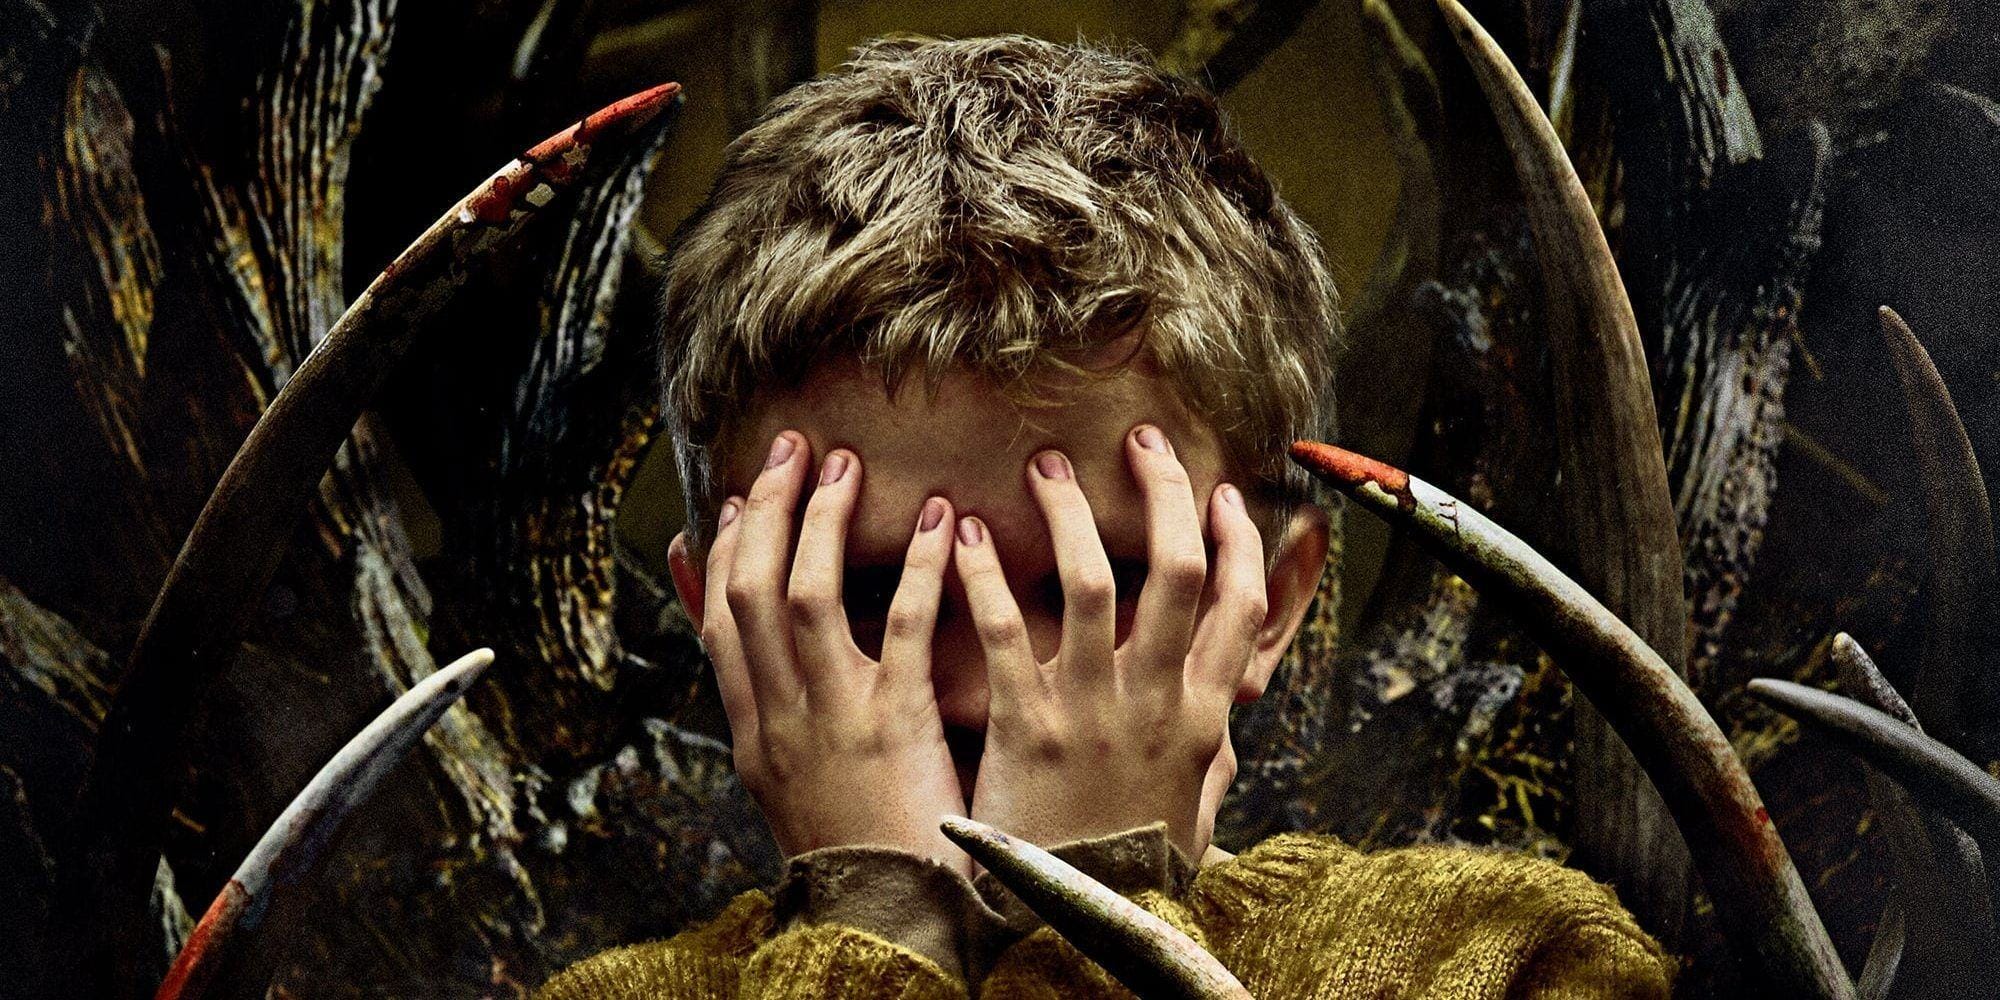 A young boy covering his face in the poster for Antlers